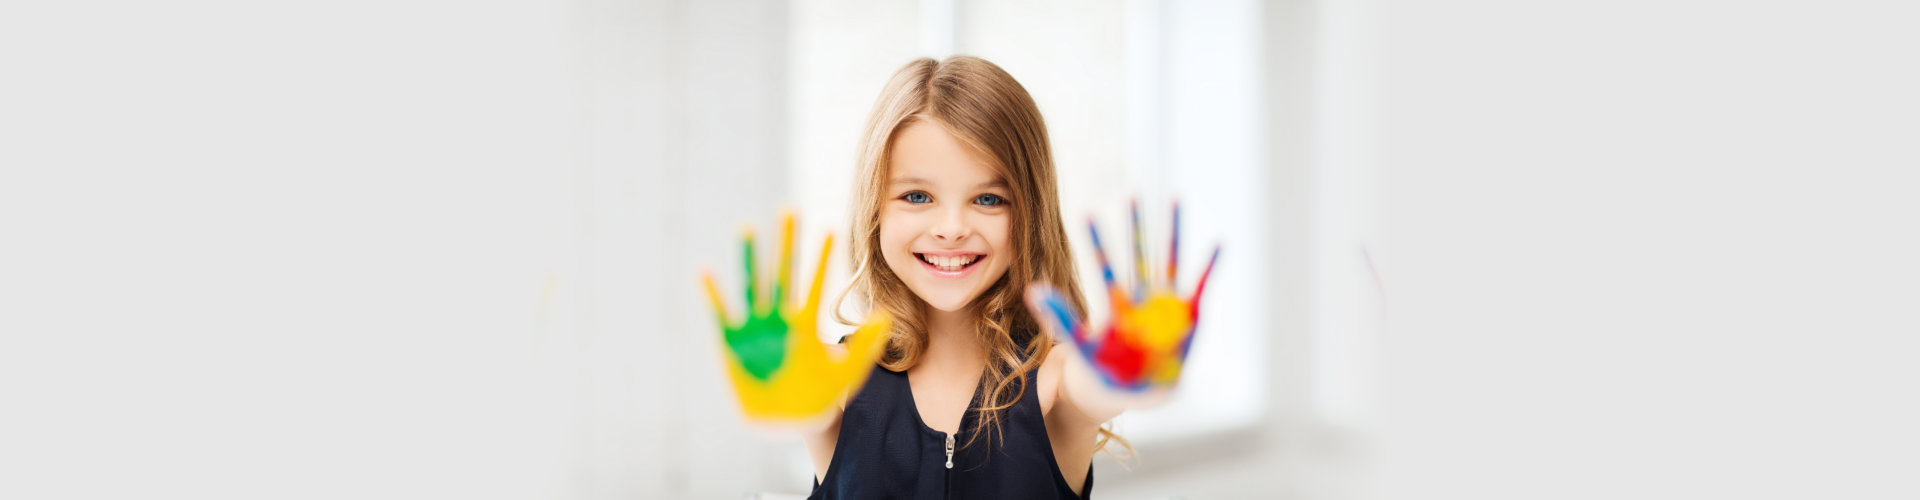 Smiling girl showing painted hands